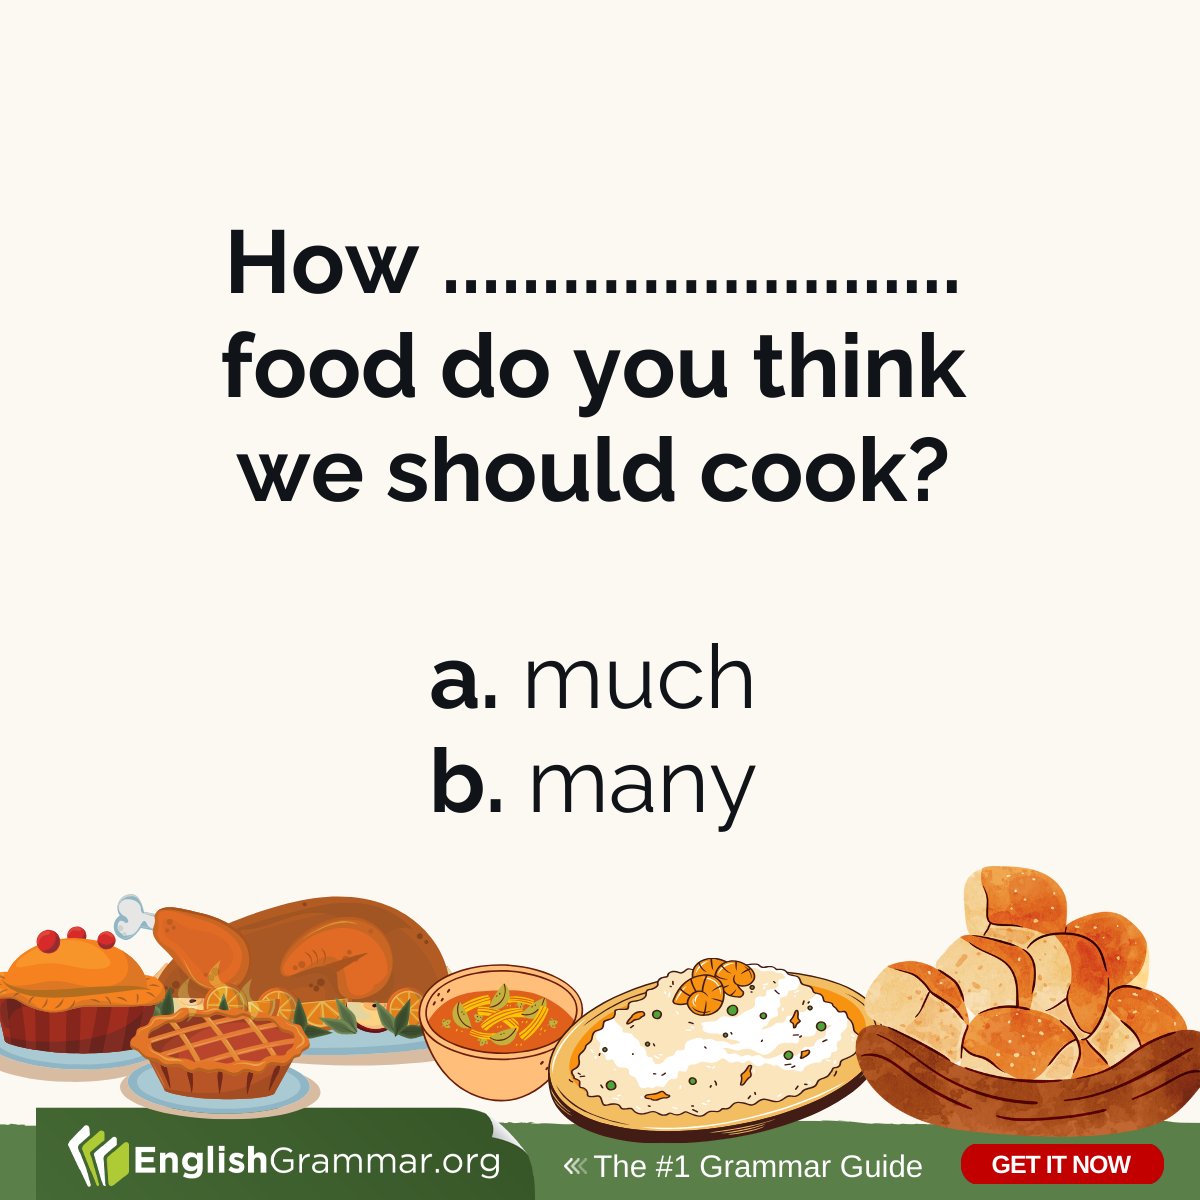 Anyone?

Find the right answer here: englishgrammar.org/countable-and-…

#amwriting #writing #grammar